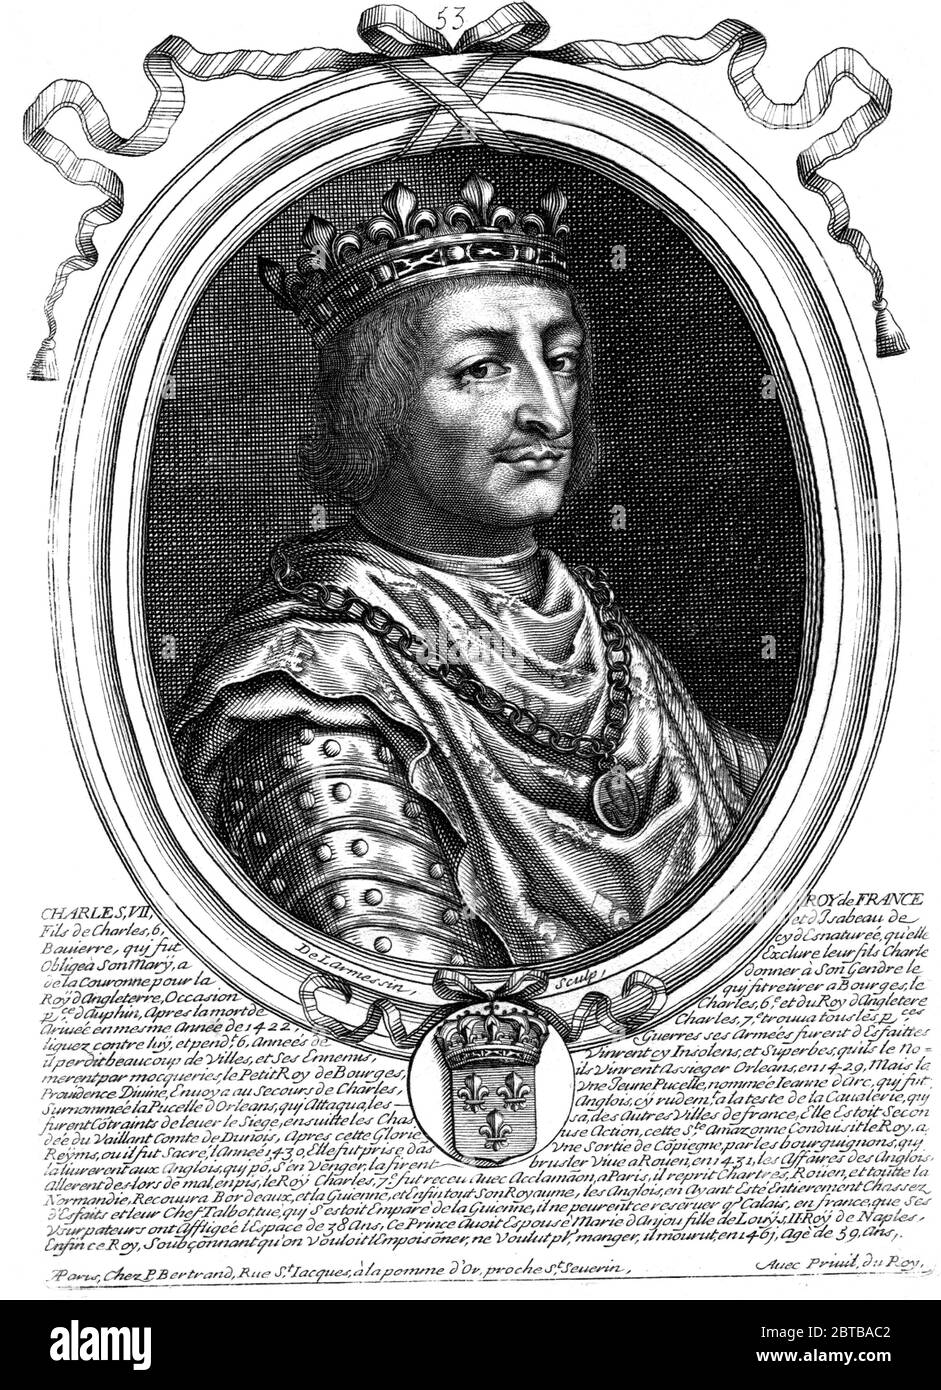 1460 ca , FRANCE:French King CHARLES VII Valois ( 1403 - 1461 ). Married with Maria d'Angiò ( Marie Anjou ,  1404 - 1463 ) daughter of Knig of Napoli . Father of french King Louis XI ( 1423 - 1983 ). Engraving portrait by De Larmes , Paris, XIX century. - NOBILITY - NOBILI francesi - Nobiltà francese - FRANCIA - illustrazione - illustration - engraving - incisione - Re di Francia - corona - crown- baffi moustache - Agiò - Angioini --- ARCHIVIO GBB Stock Photo